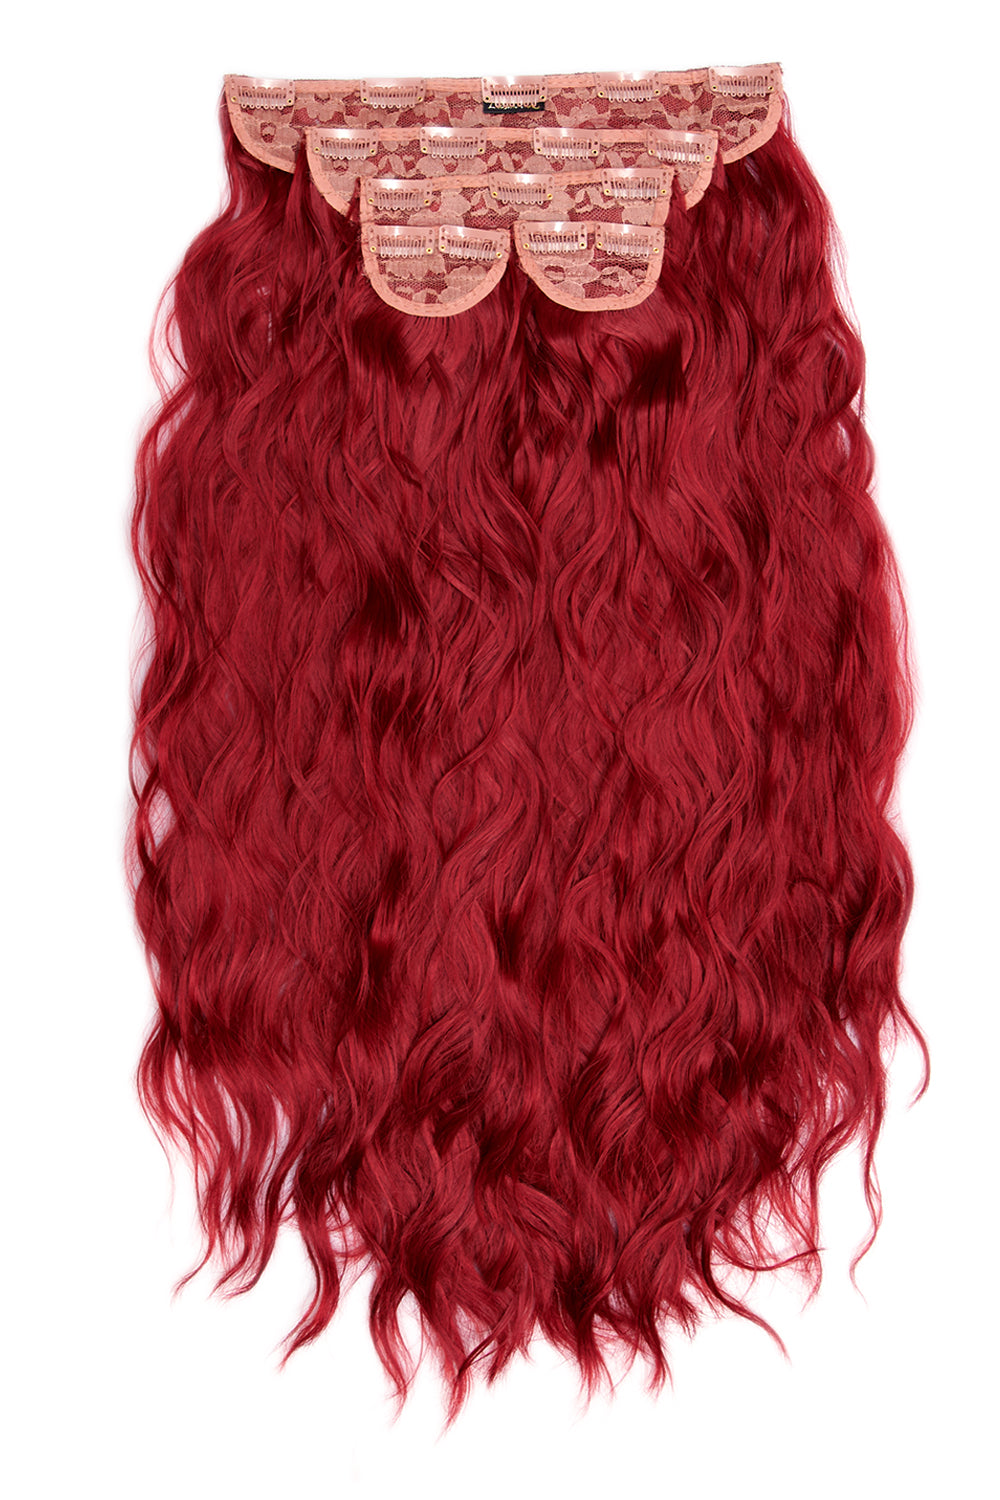 Super Thick 26" 5 Piece Waist Length Wave Clip In Hair Extensions - LullaBellz  - Ruby Red Festival Hair Inspiration